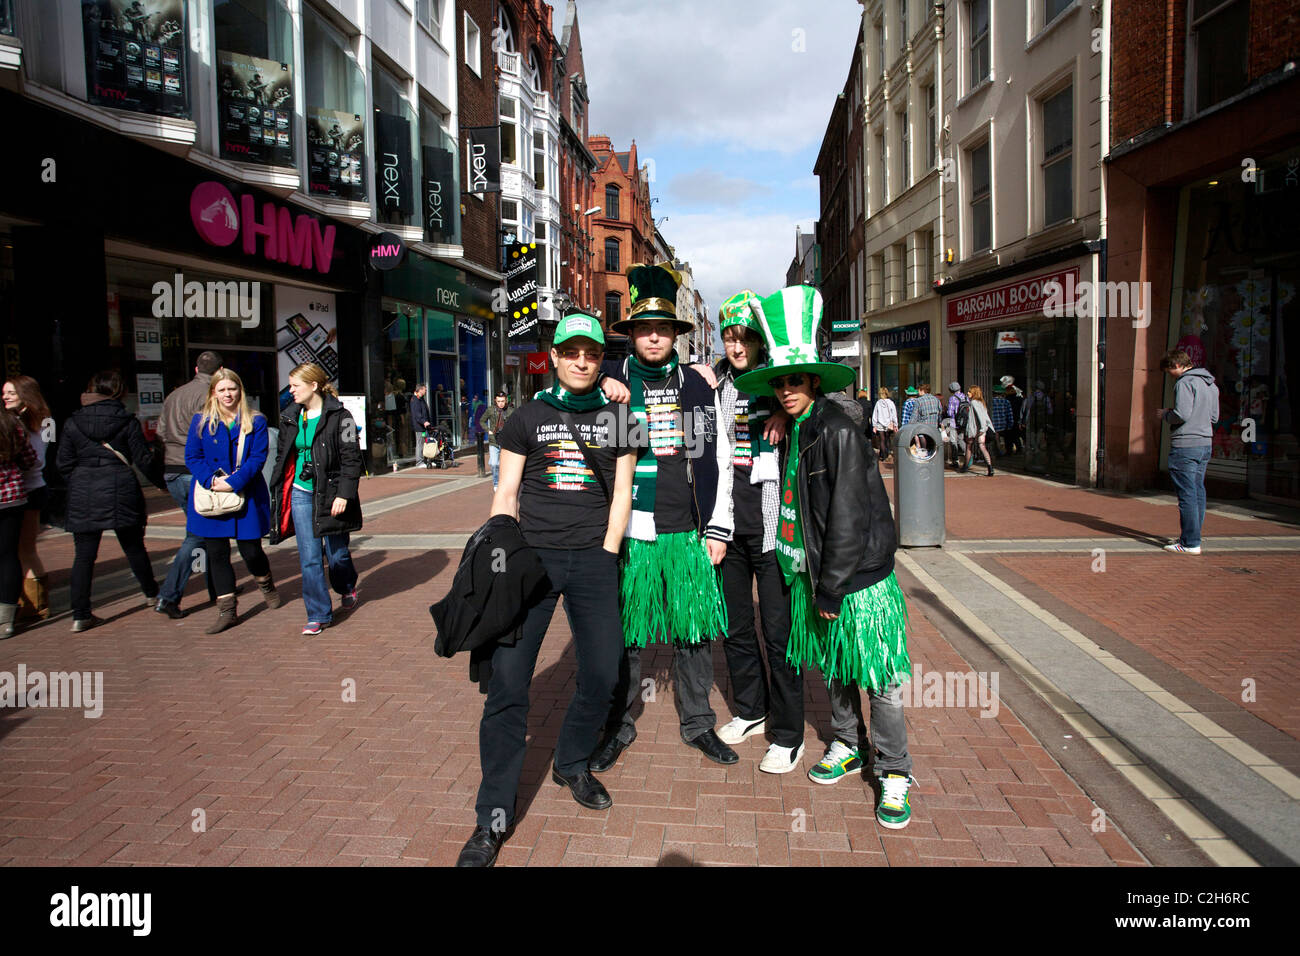 Visitors to the St Patricks Day parade and festival in Dublin, Ireland. Enjoying the 17th of March which is St Patricks Day celebrated every year Stock Photo